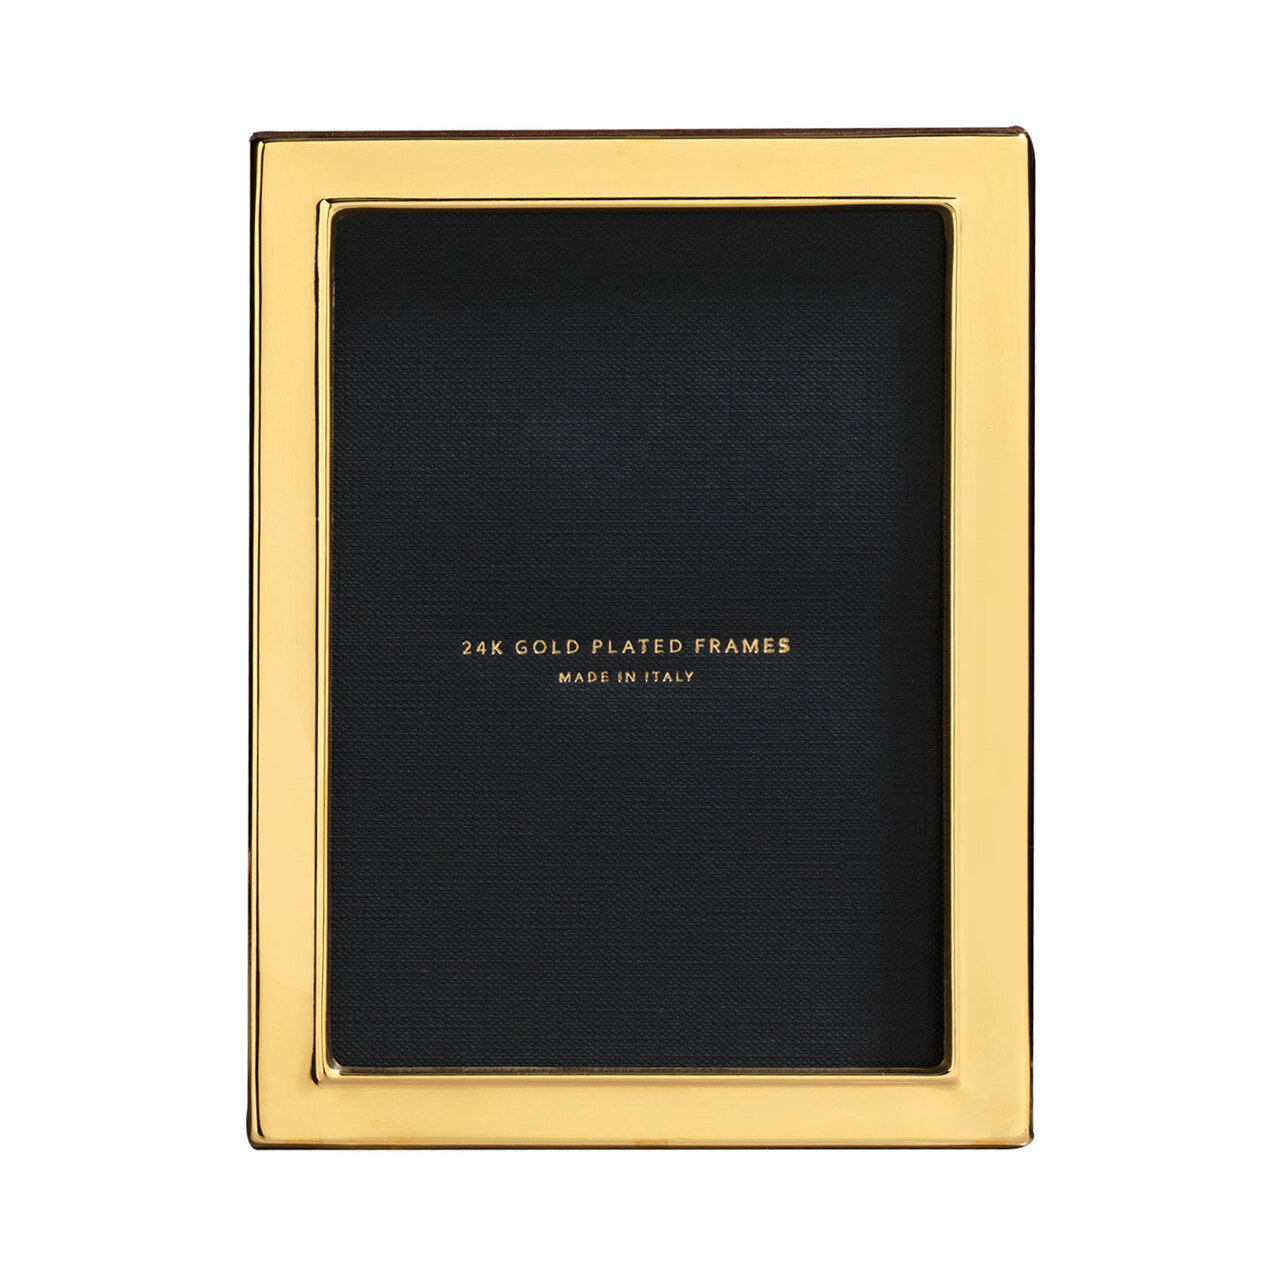 Cunill Plain 1/2 Inch Border 5 x 7 Inch Picture Frame - 24k Gold Plated 0.5 Microns